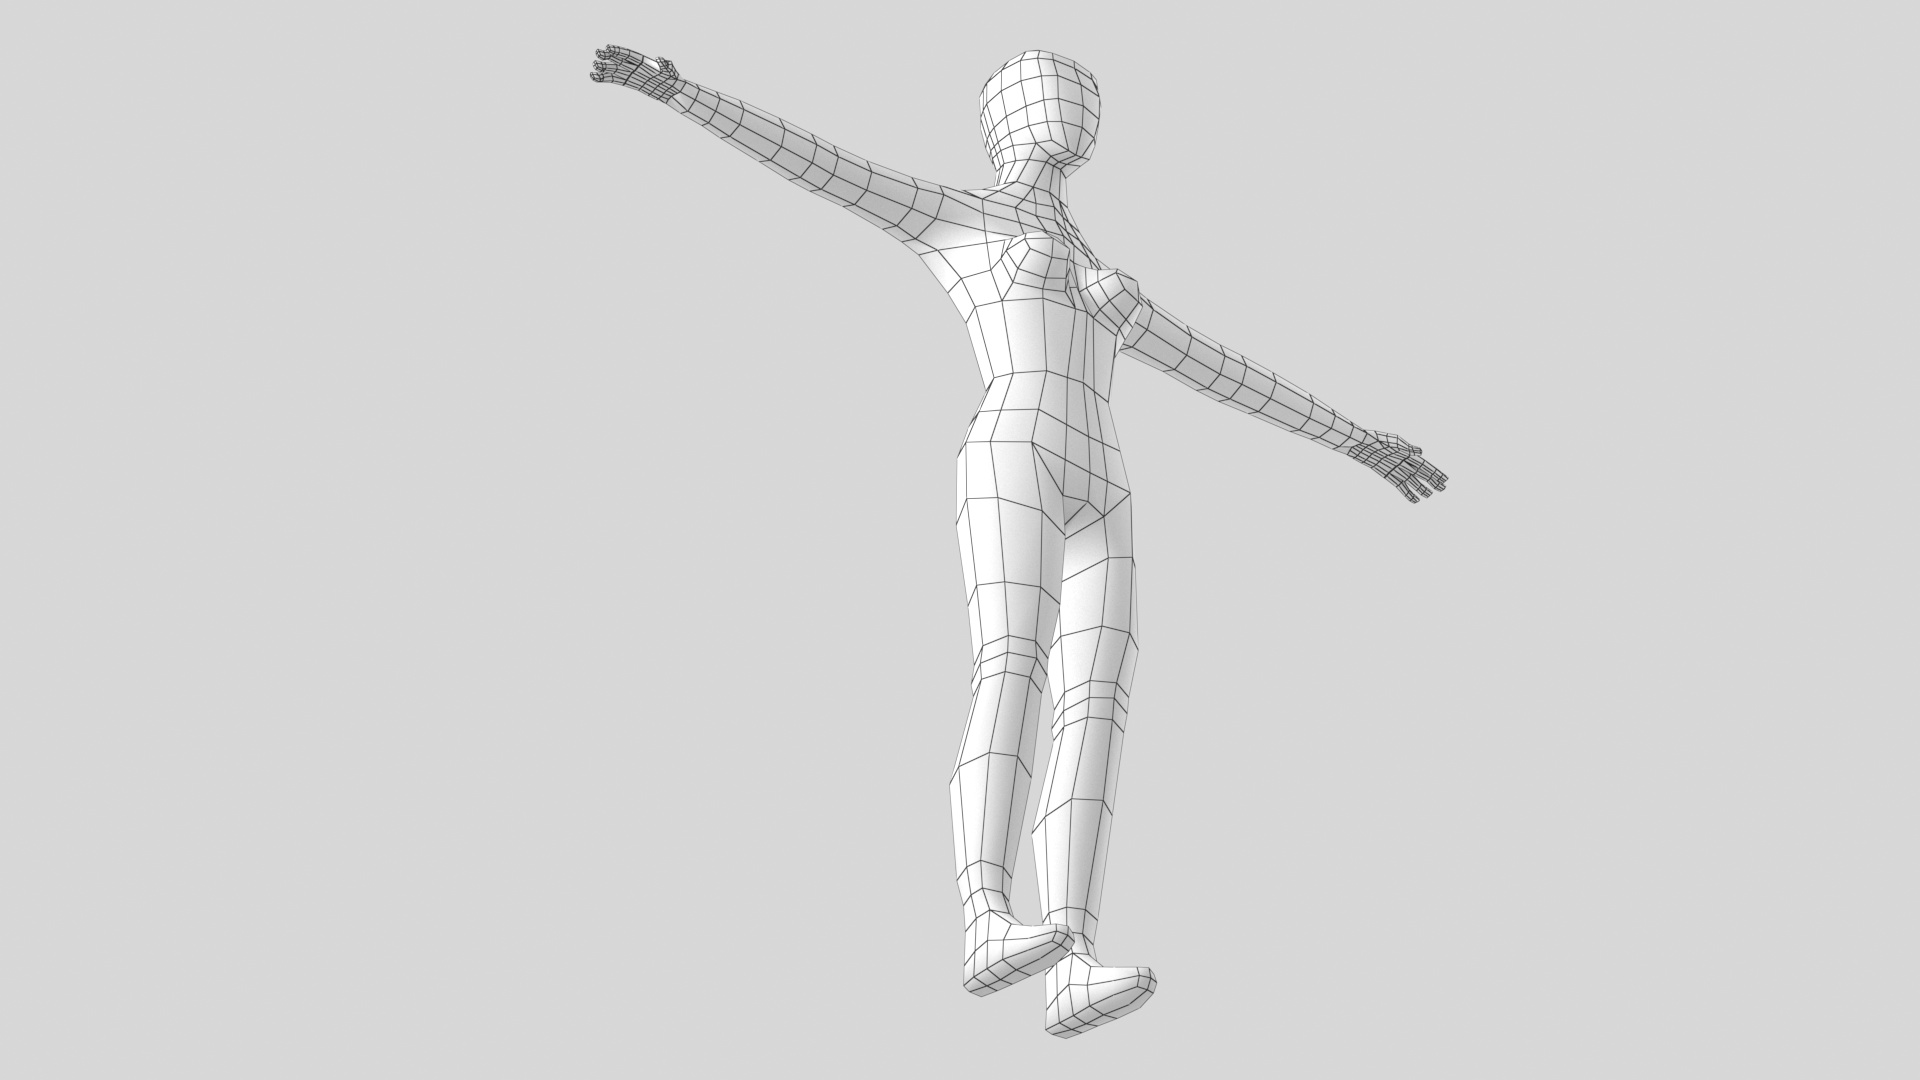 Character Art Pose References - CLIP STUDIO PAINT